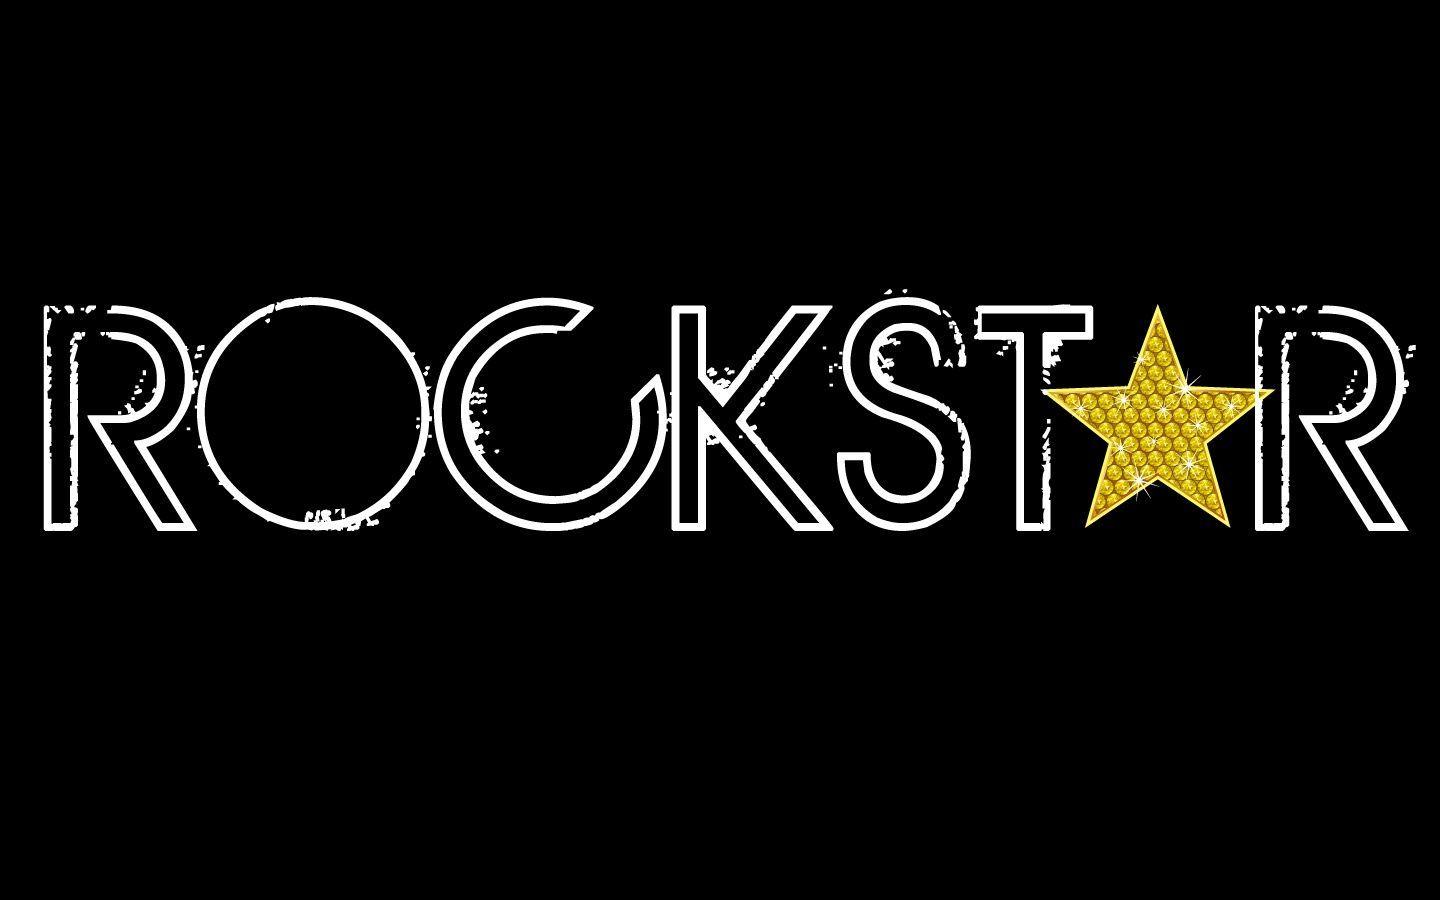 Rockstar Facebook Covers Covers, FB Covers, Timeline